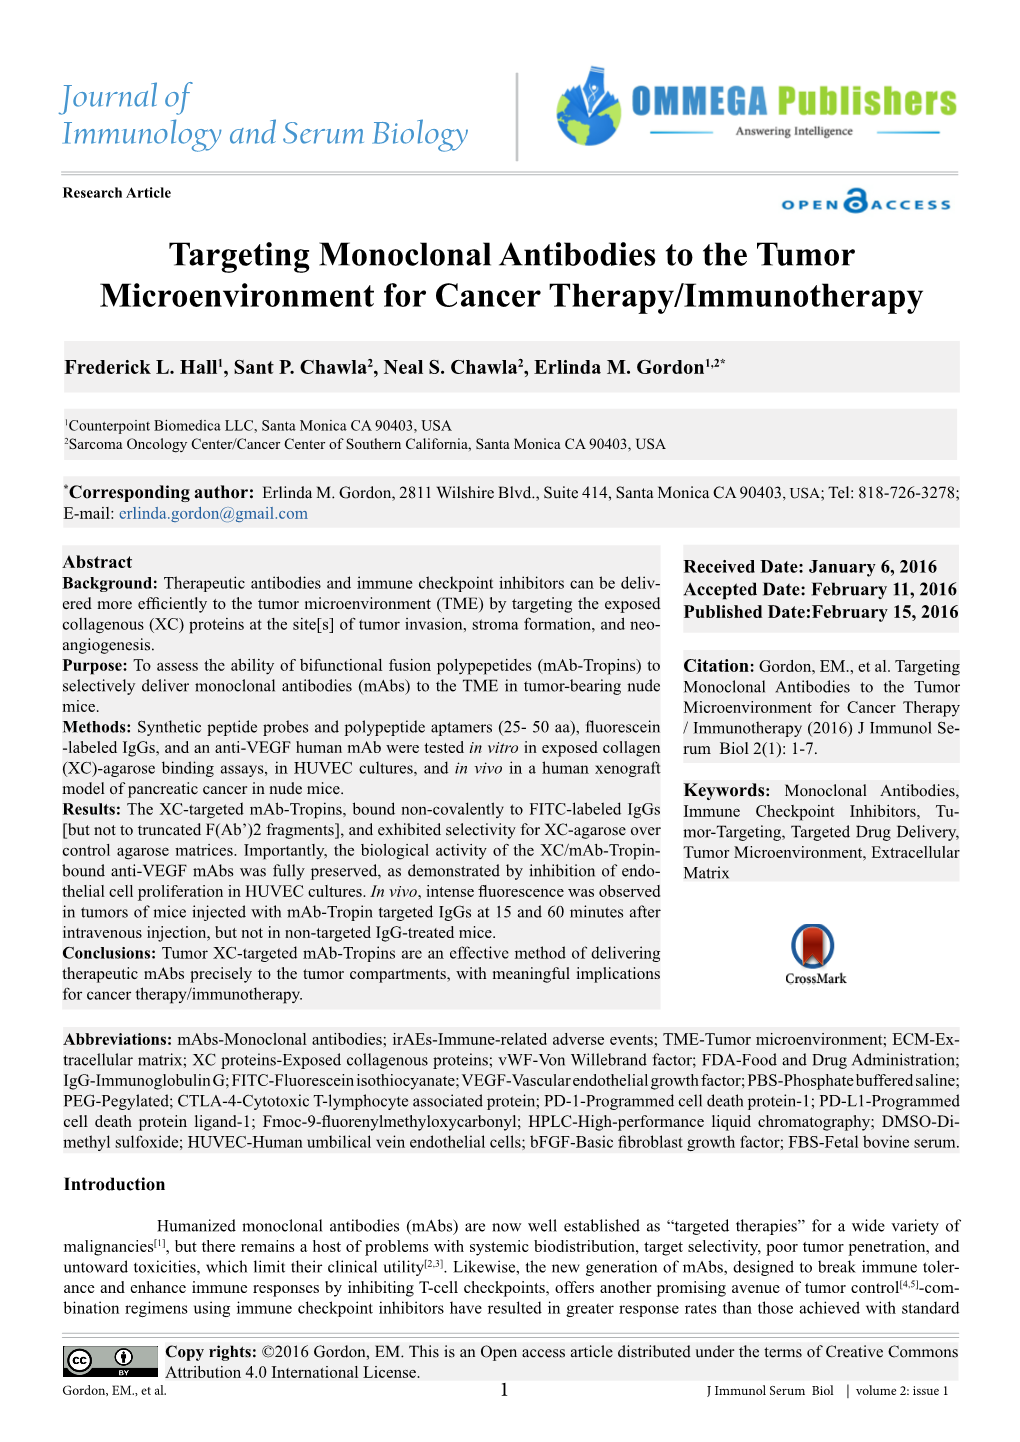 Targeting Monoclonal Antibodies to the Tumor Microenvironment for Cancer Therapy/Immunotherapy